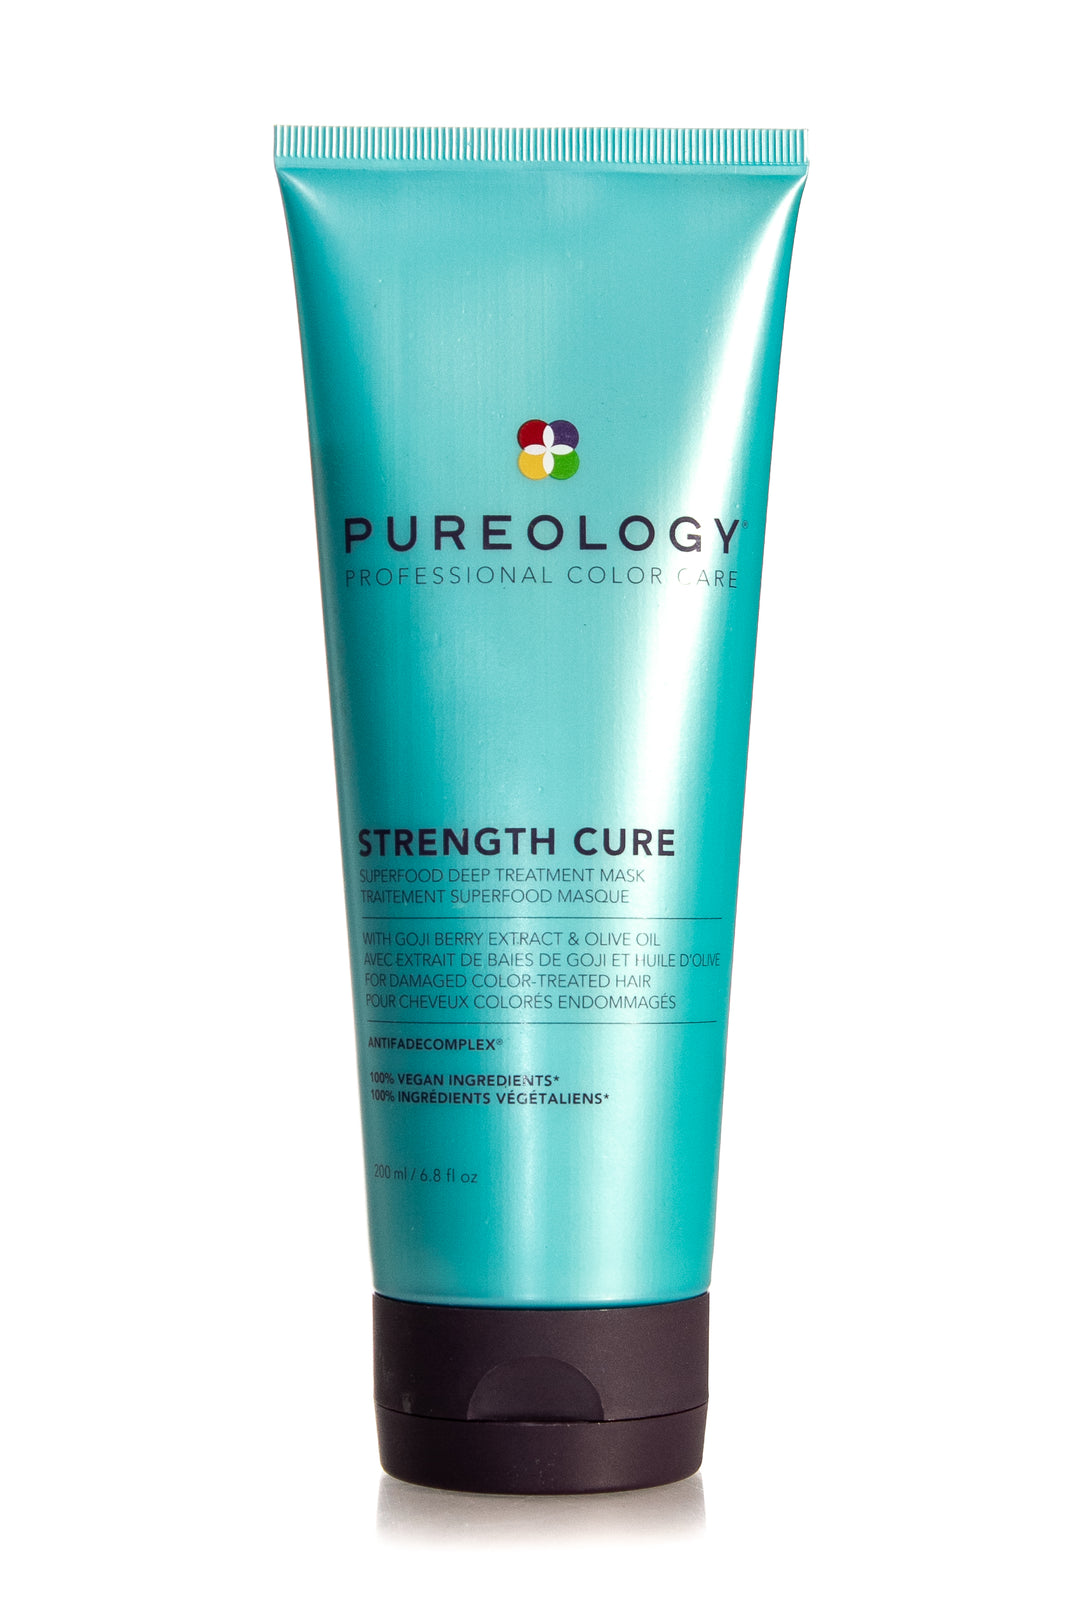 PUREOLOGY Strength Cure Superfood Deep Treatment Mask | 200ml